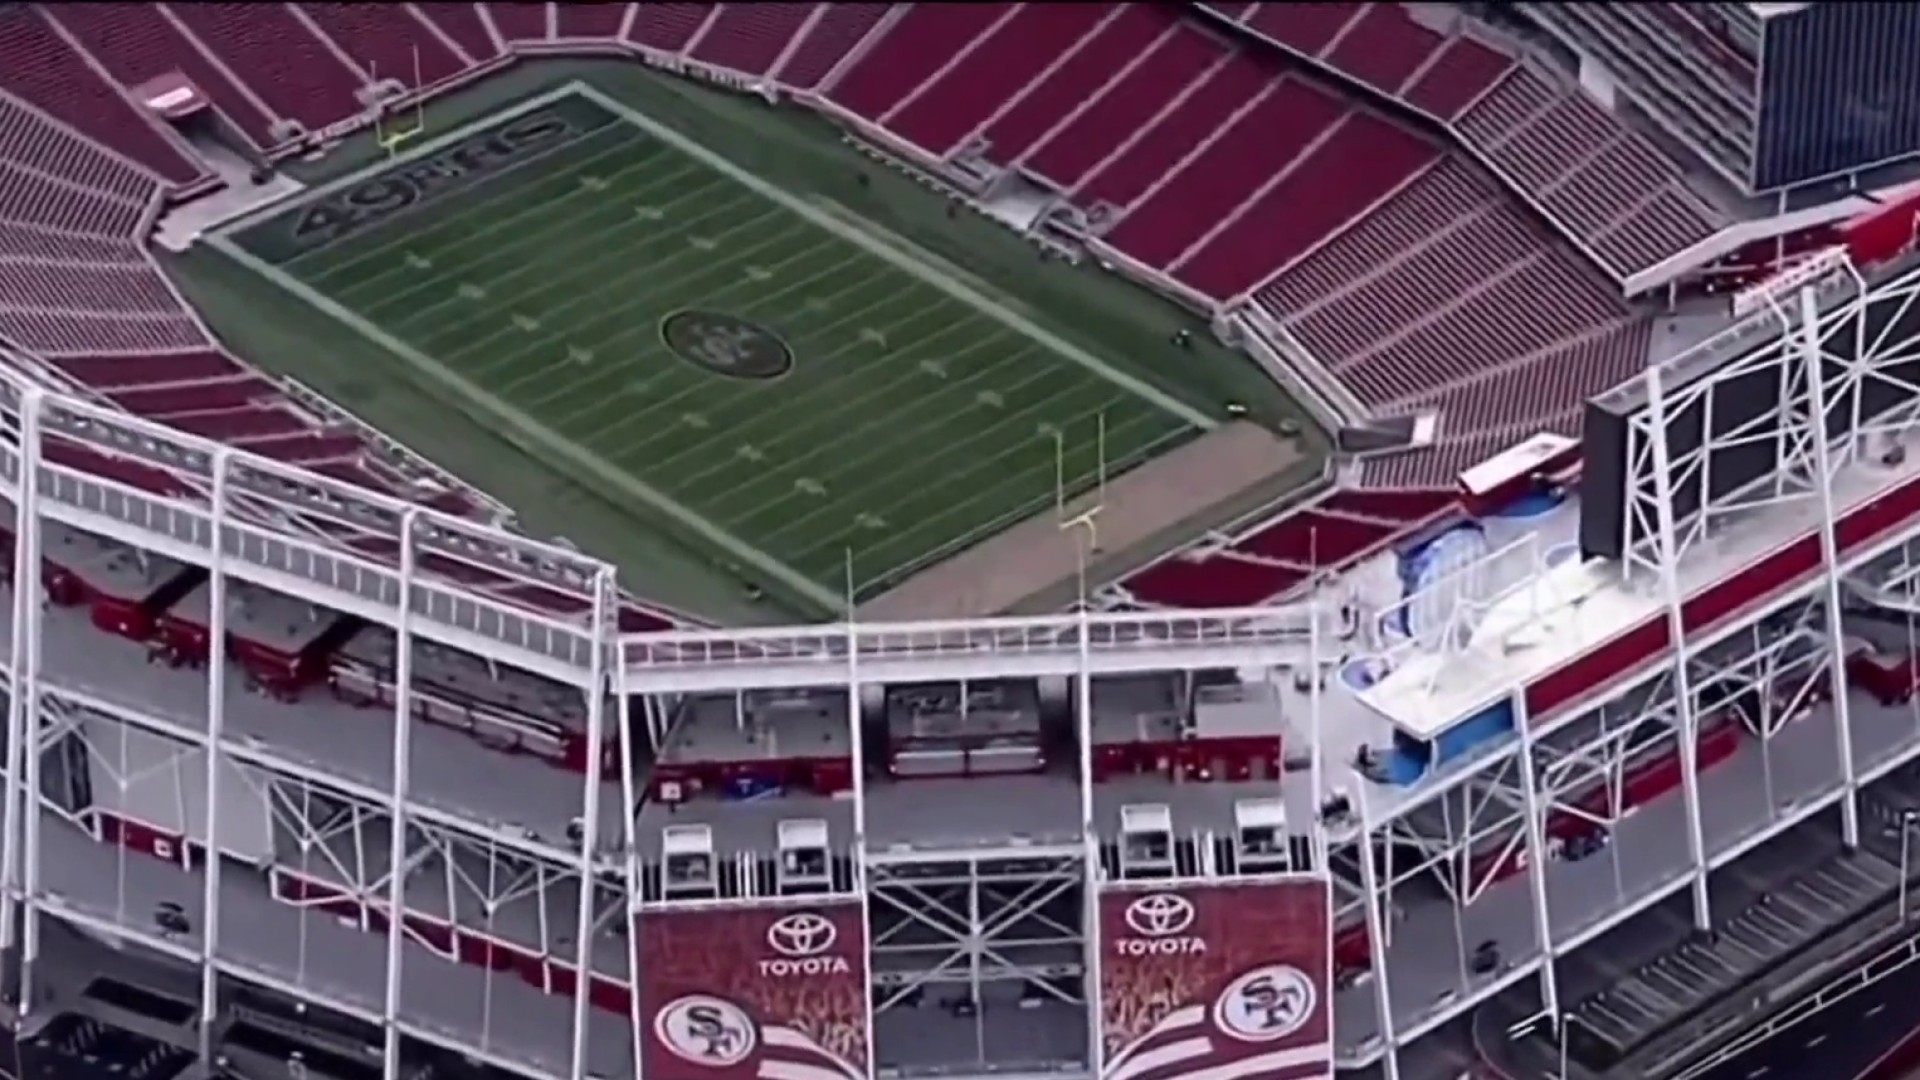 49ers, Levi's Stadium Gearing for Coldplay Concert – NBC Bay Area